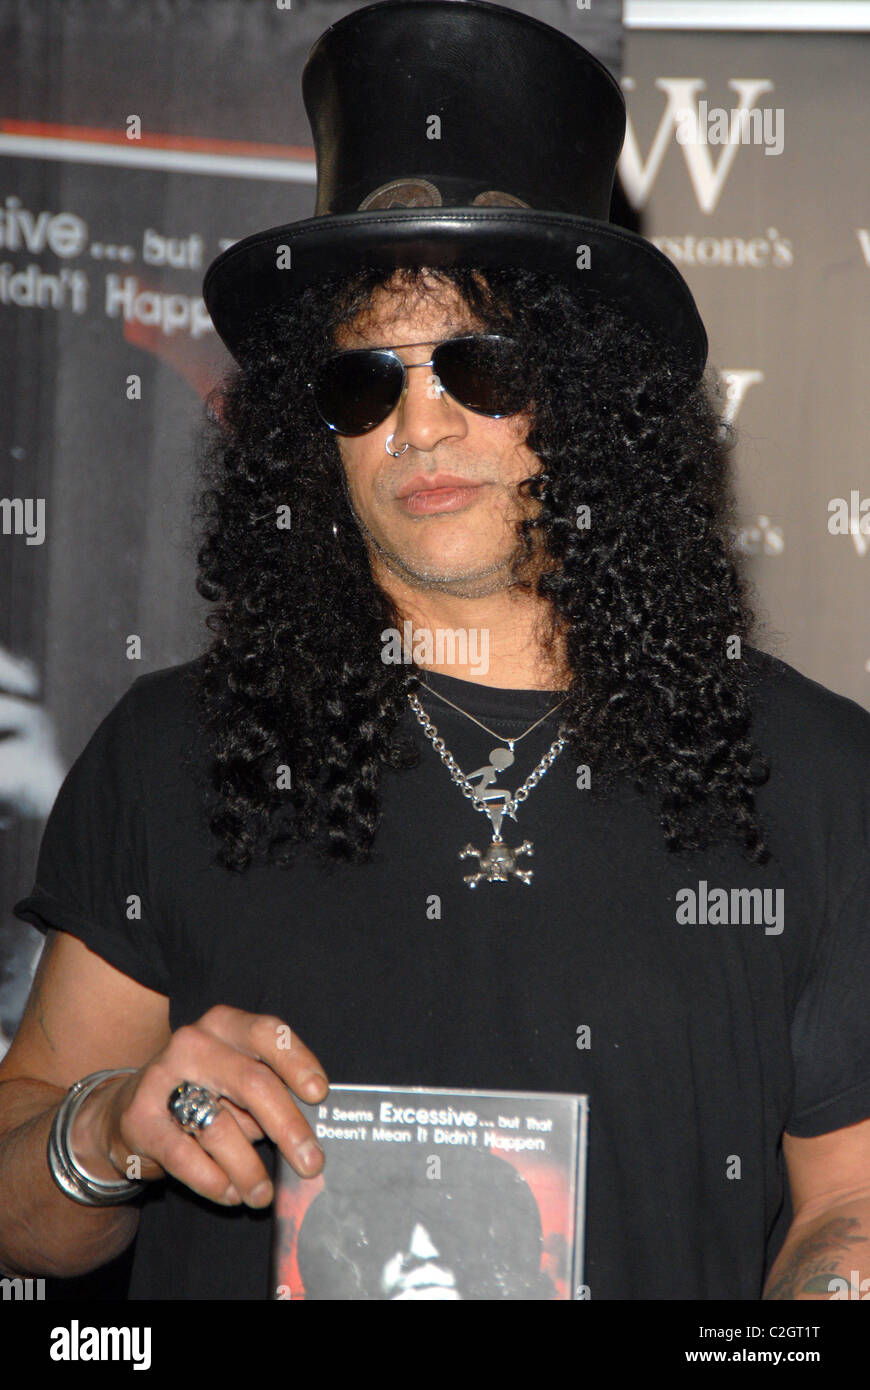 Former lead guitarist in Guns N' Roses, Slash, at Waterstone's book store  to sign copies of autobiography, 'Slash', a tell-all account of his life in  the legendary rock band Stock Photo 